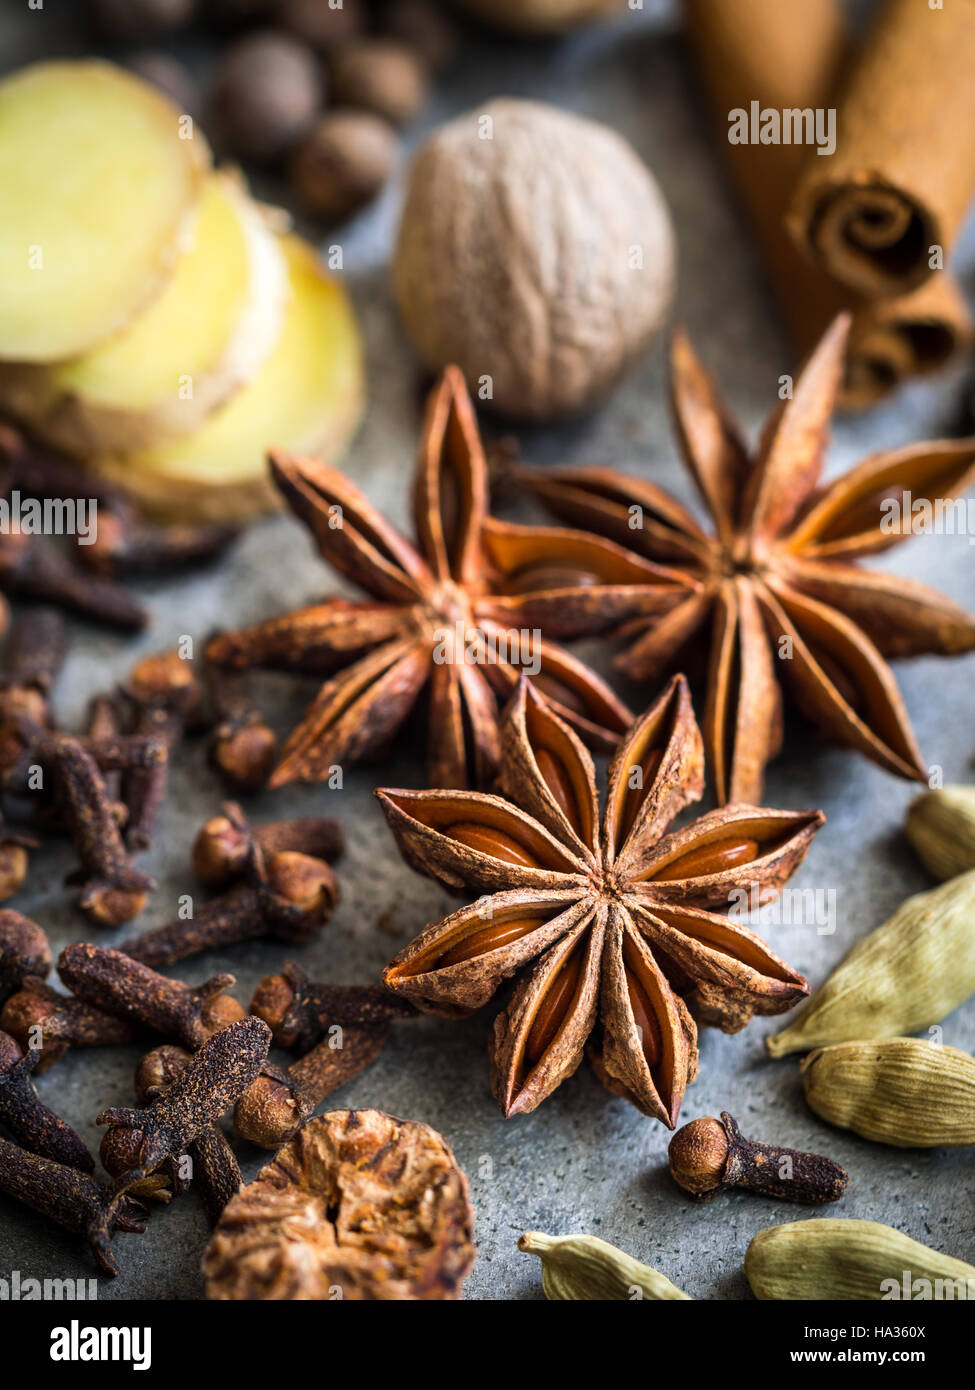 Spices for making gingerbread spice mix. Anise star in focus. Stock Photo